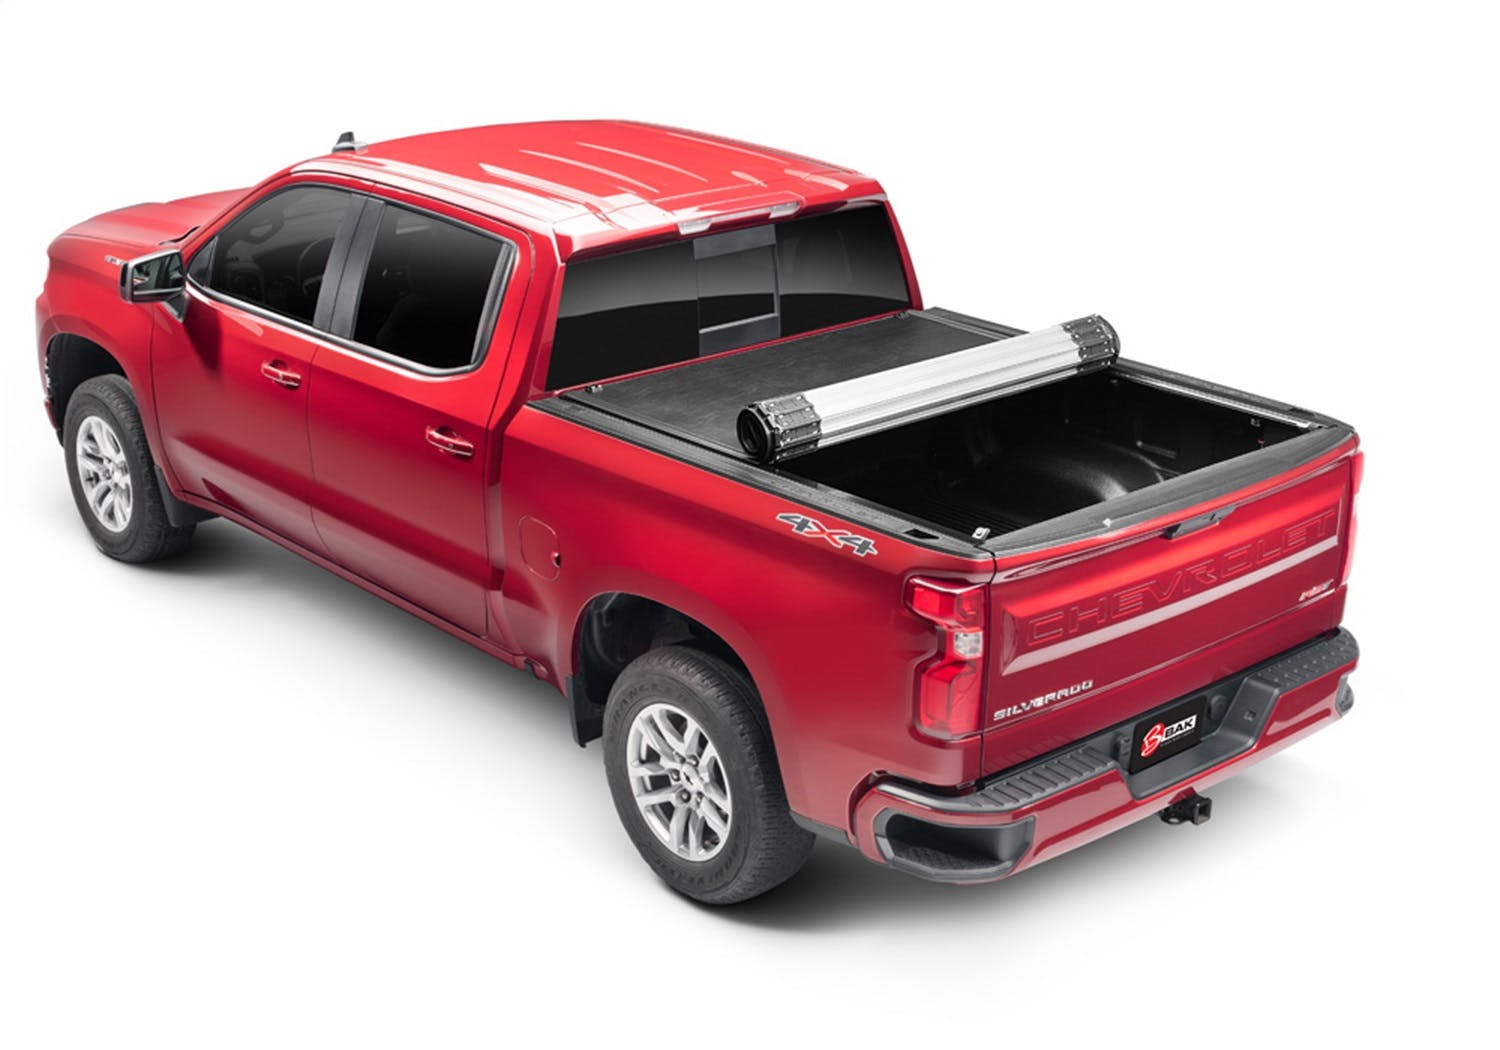 BAK Industries 39134 Revolver X2 Hard Rolling Truck Bed Cover